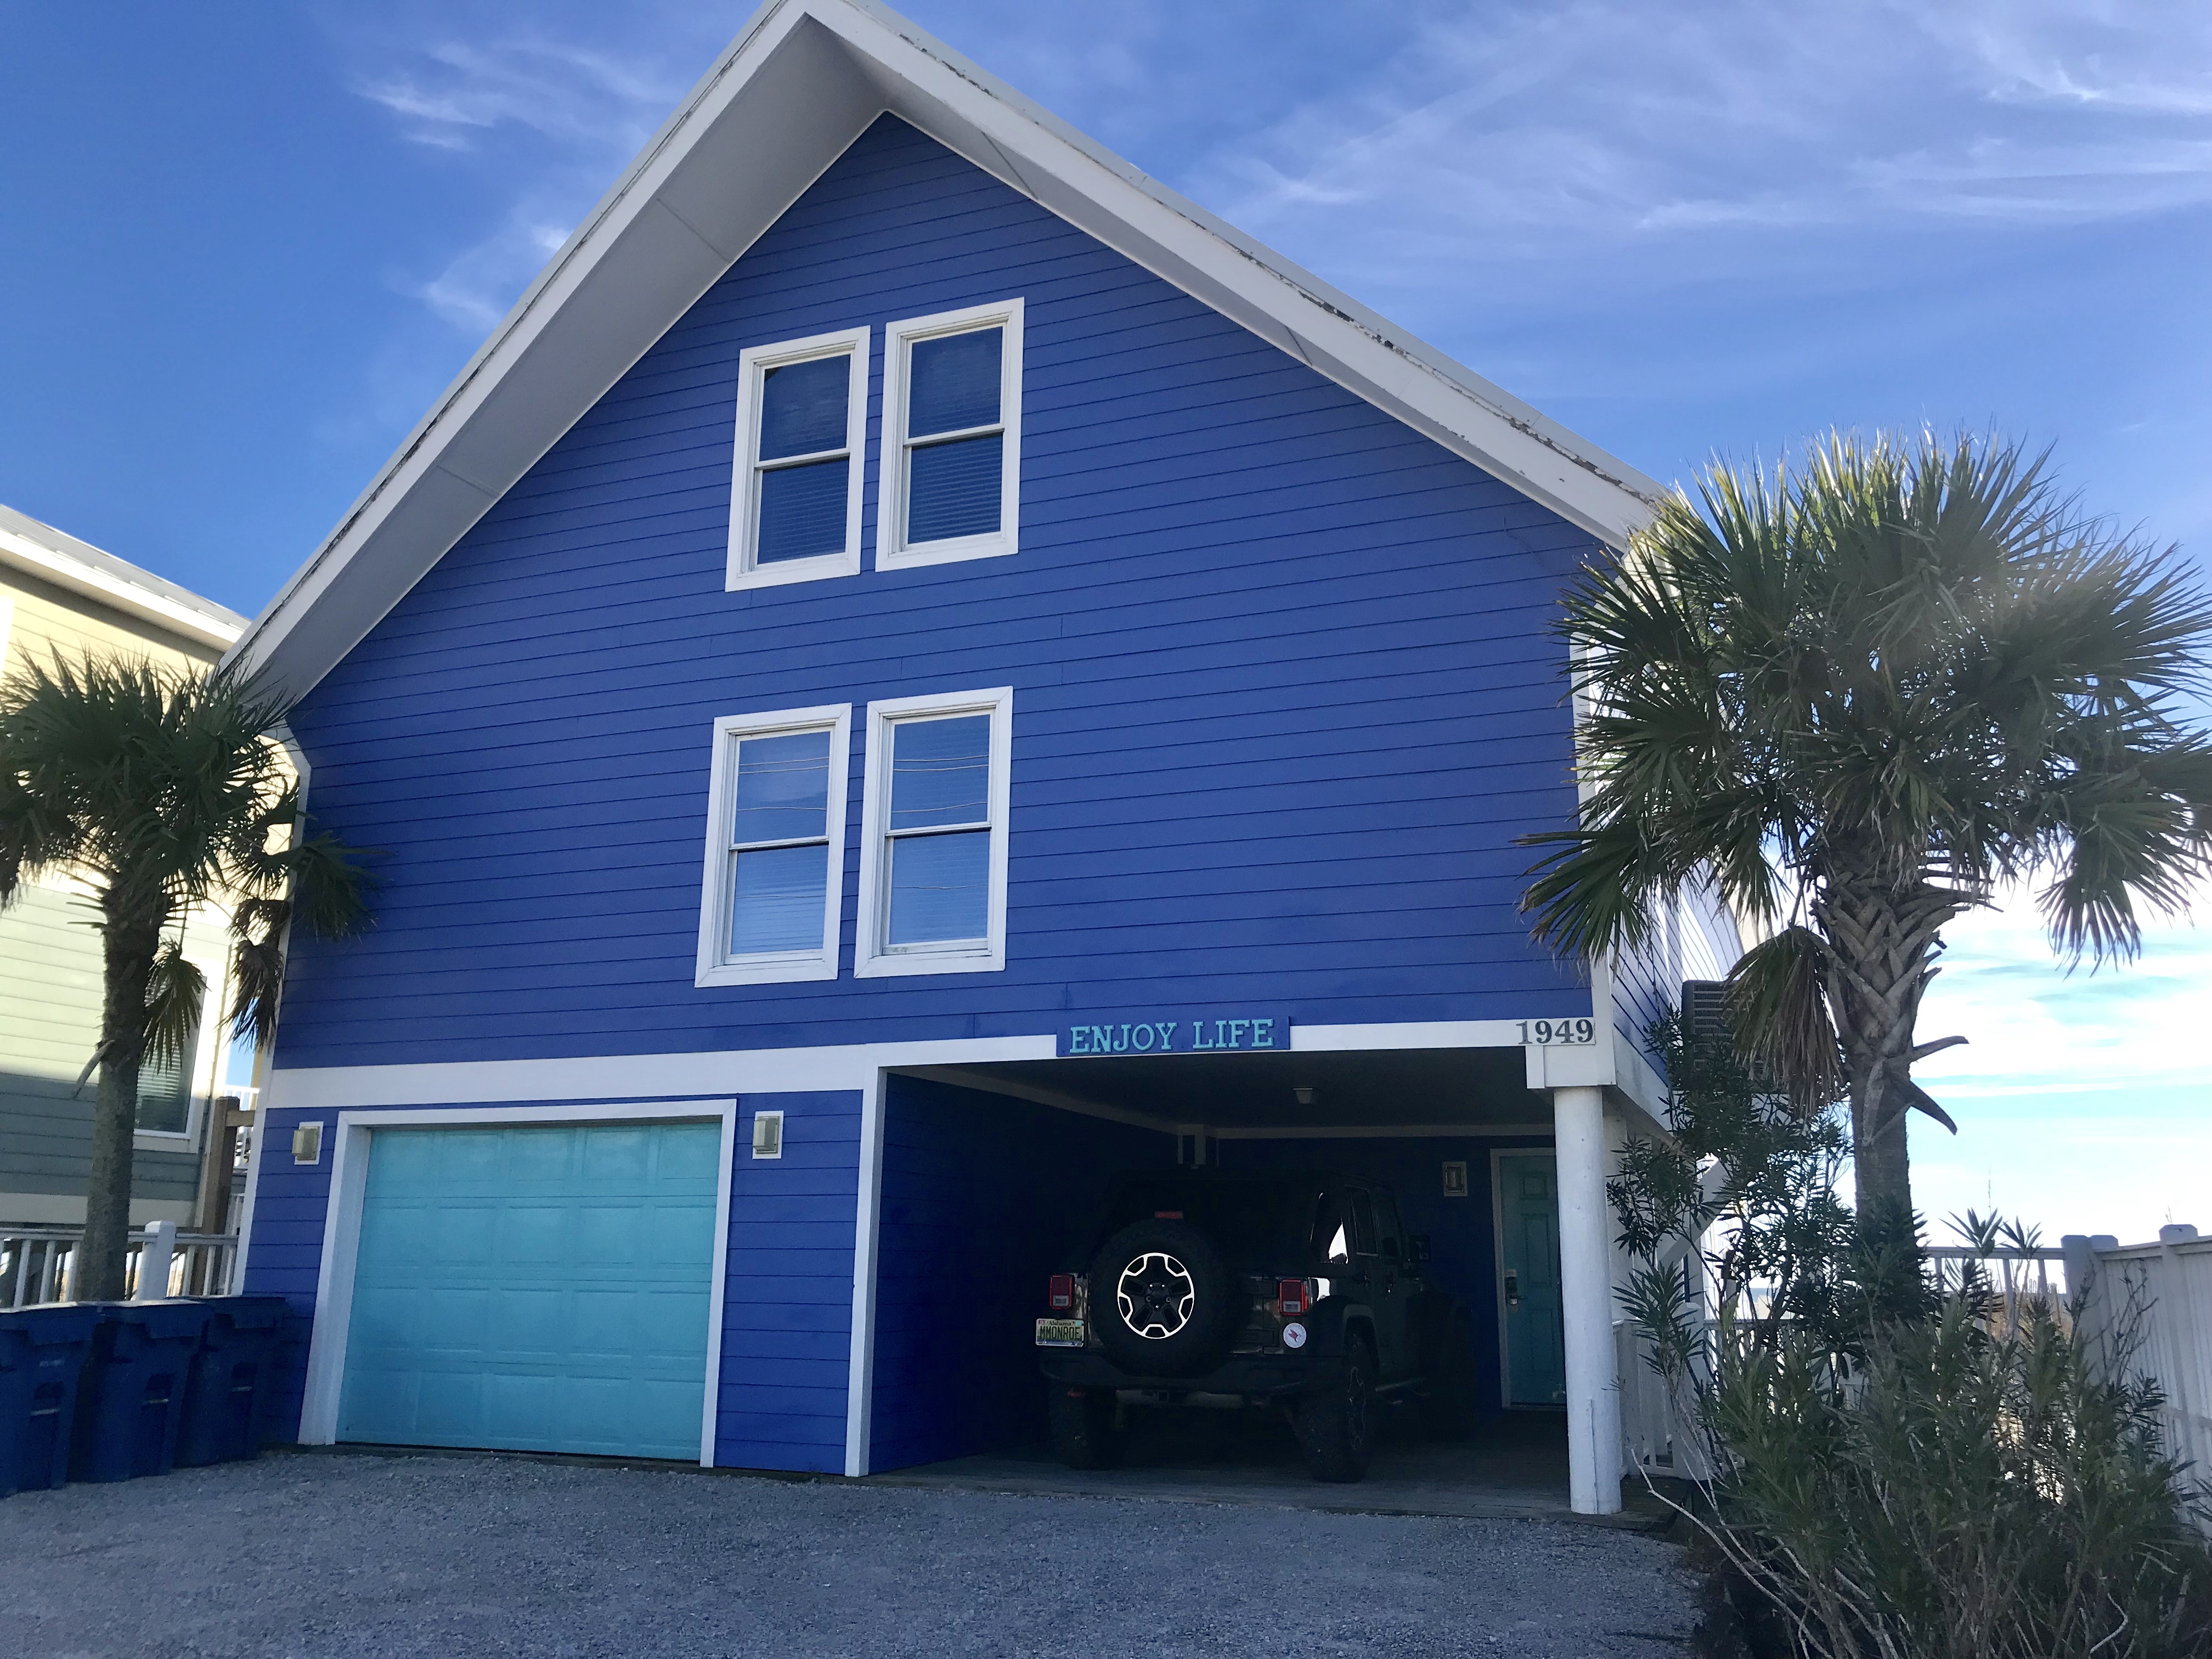 34 Top Pictures Pet Friendly Beach Rentals Gulf Shores : Pet friendly-pool-fishing-shopping-white sand beach ...